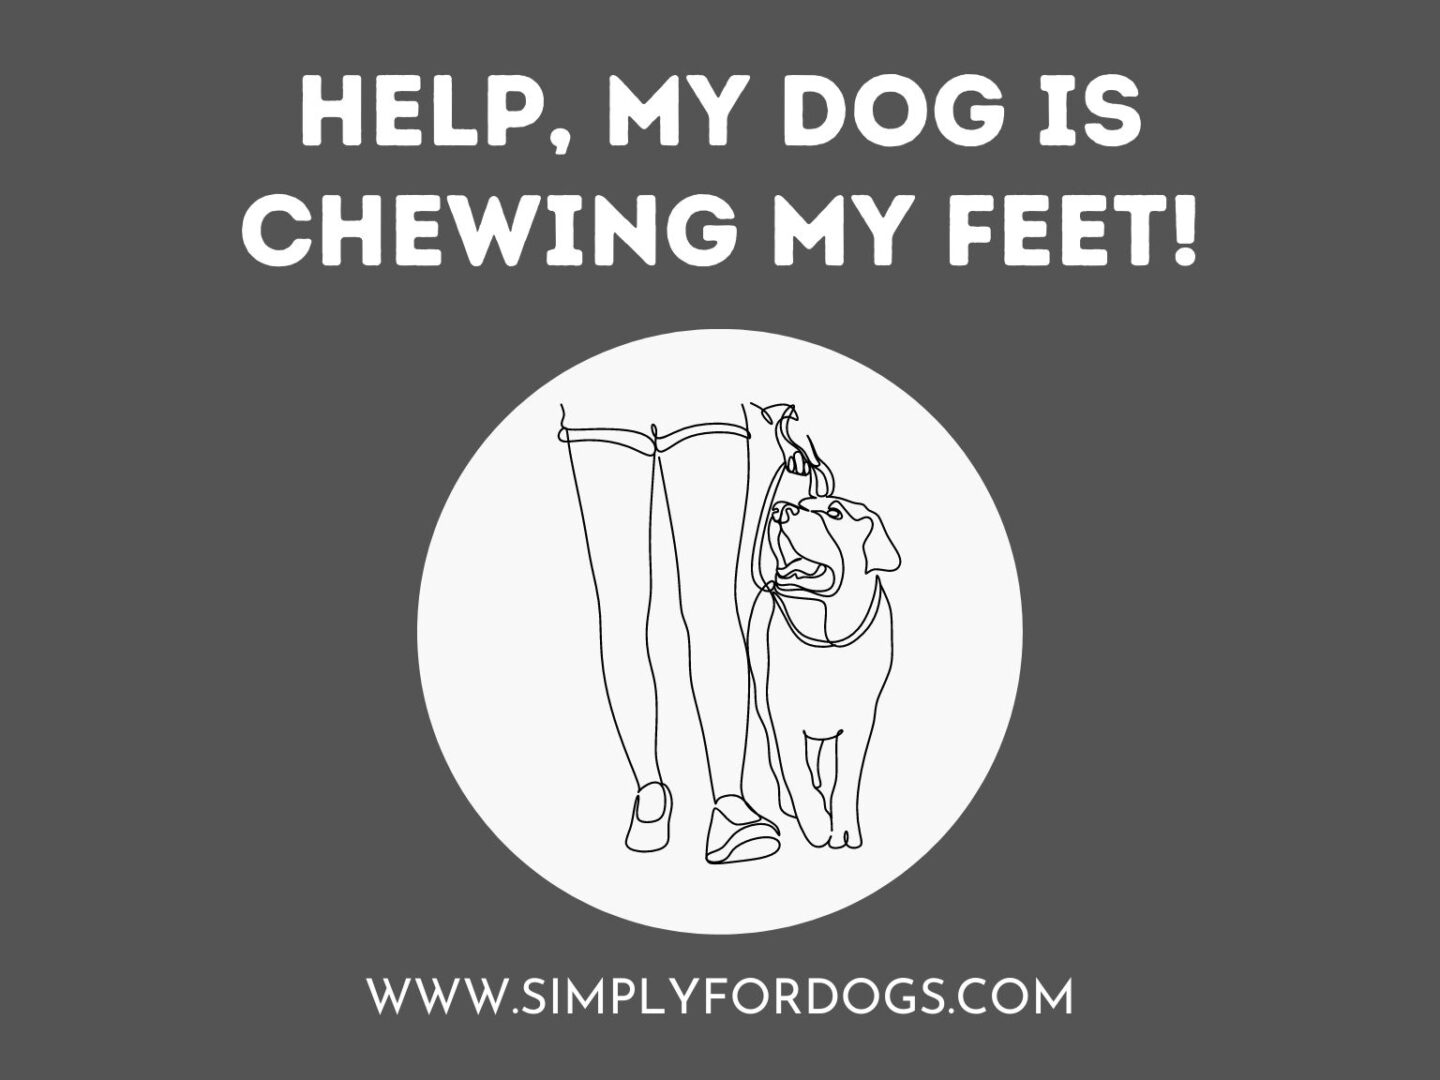 Help, My Dog Is Chewing My Feet!